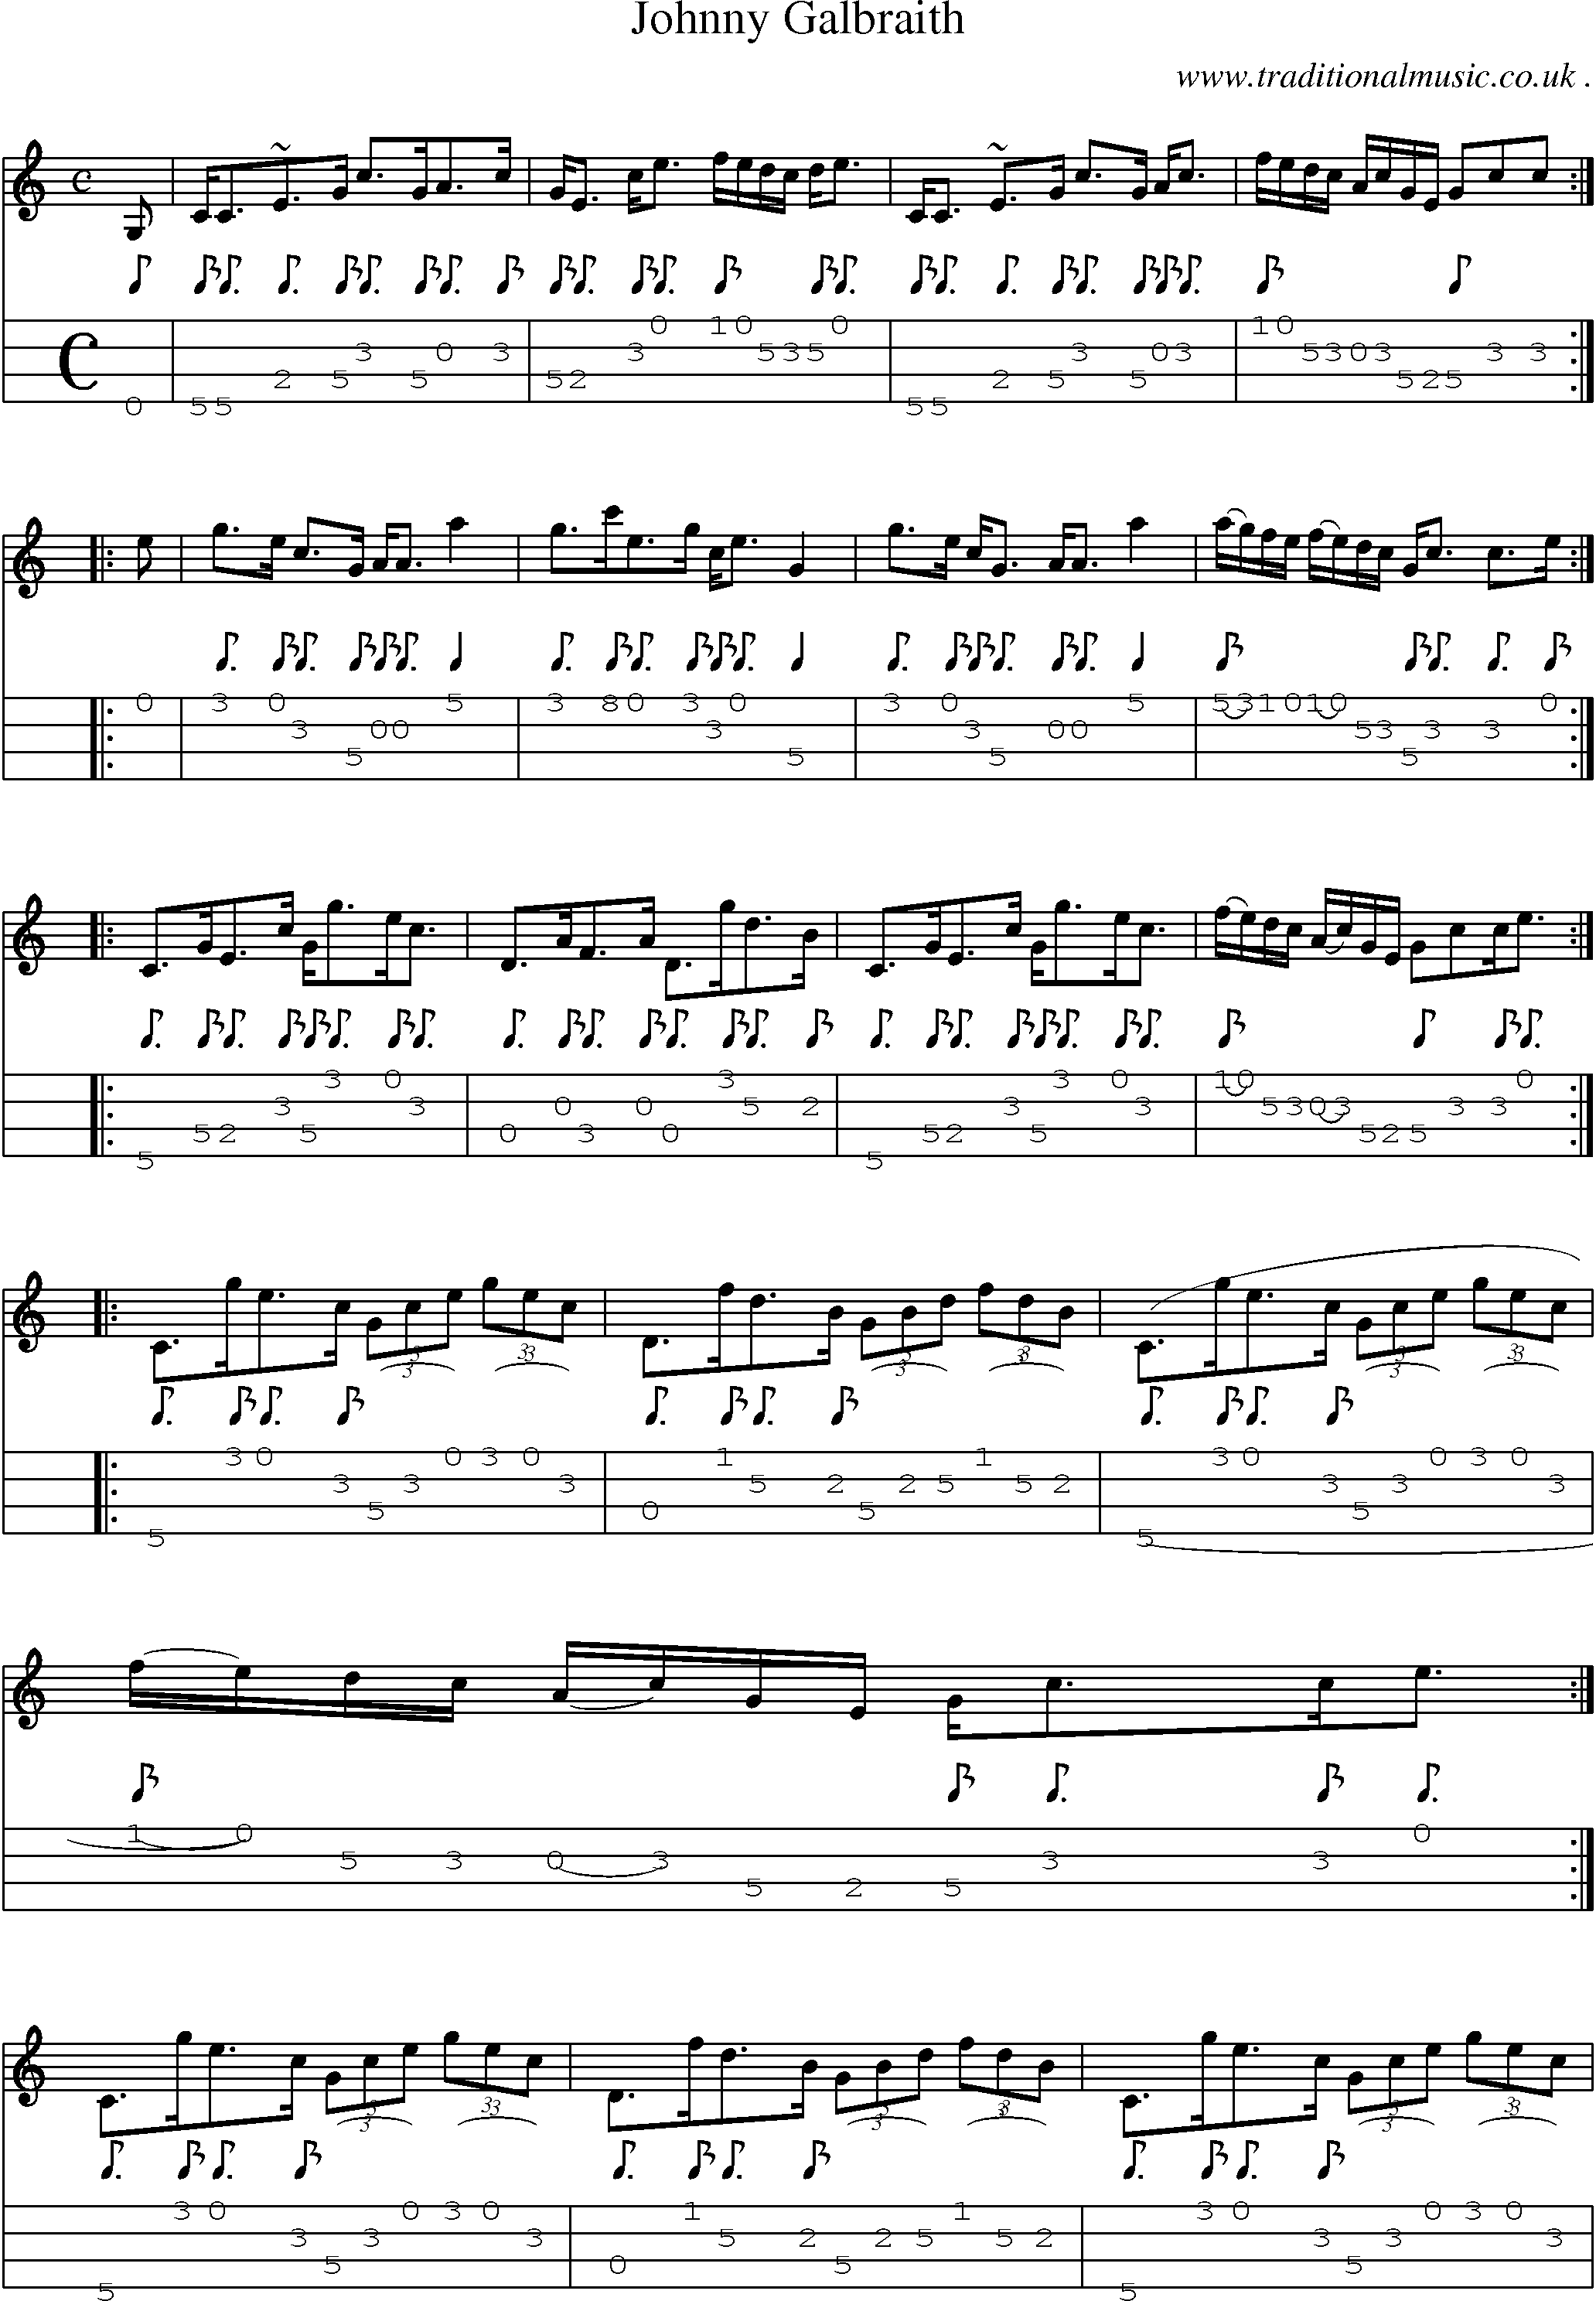 Sheet-music  score, Chords and Mandolin Tabs for Johnny Galbraith